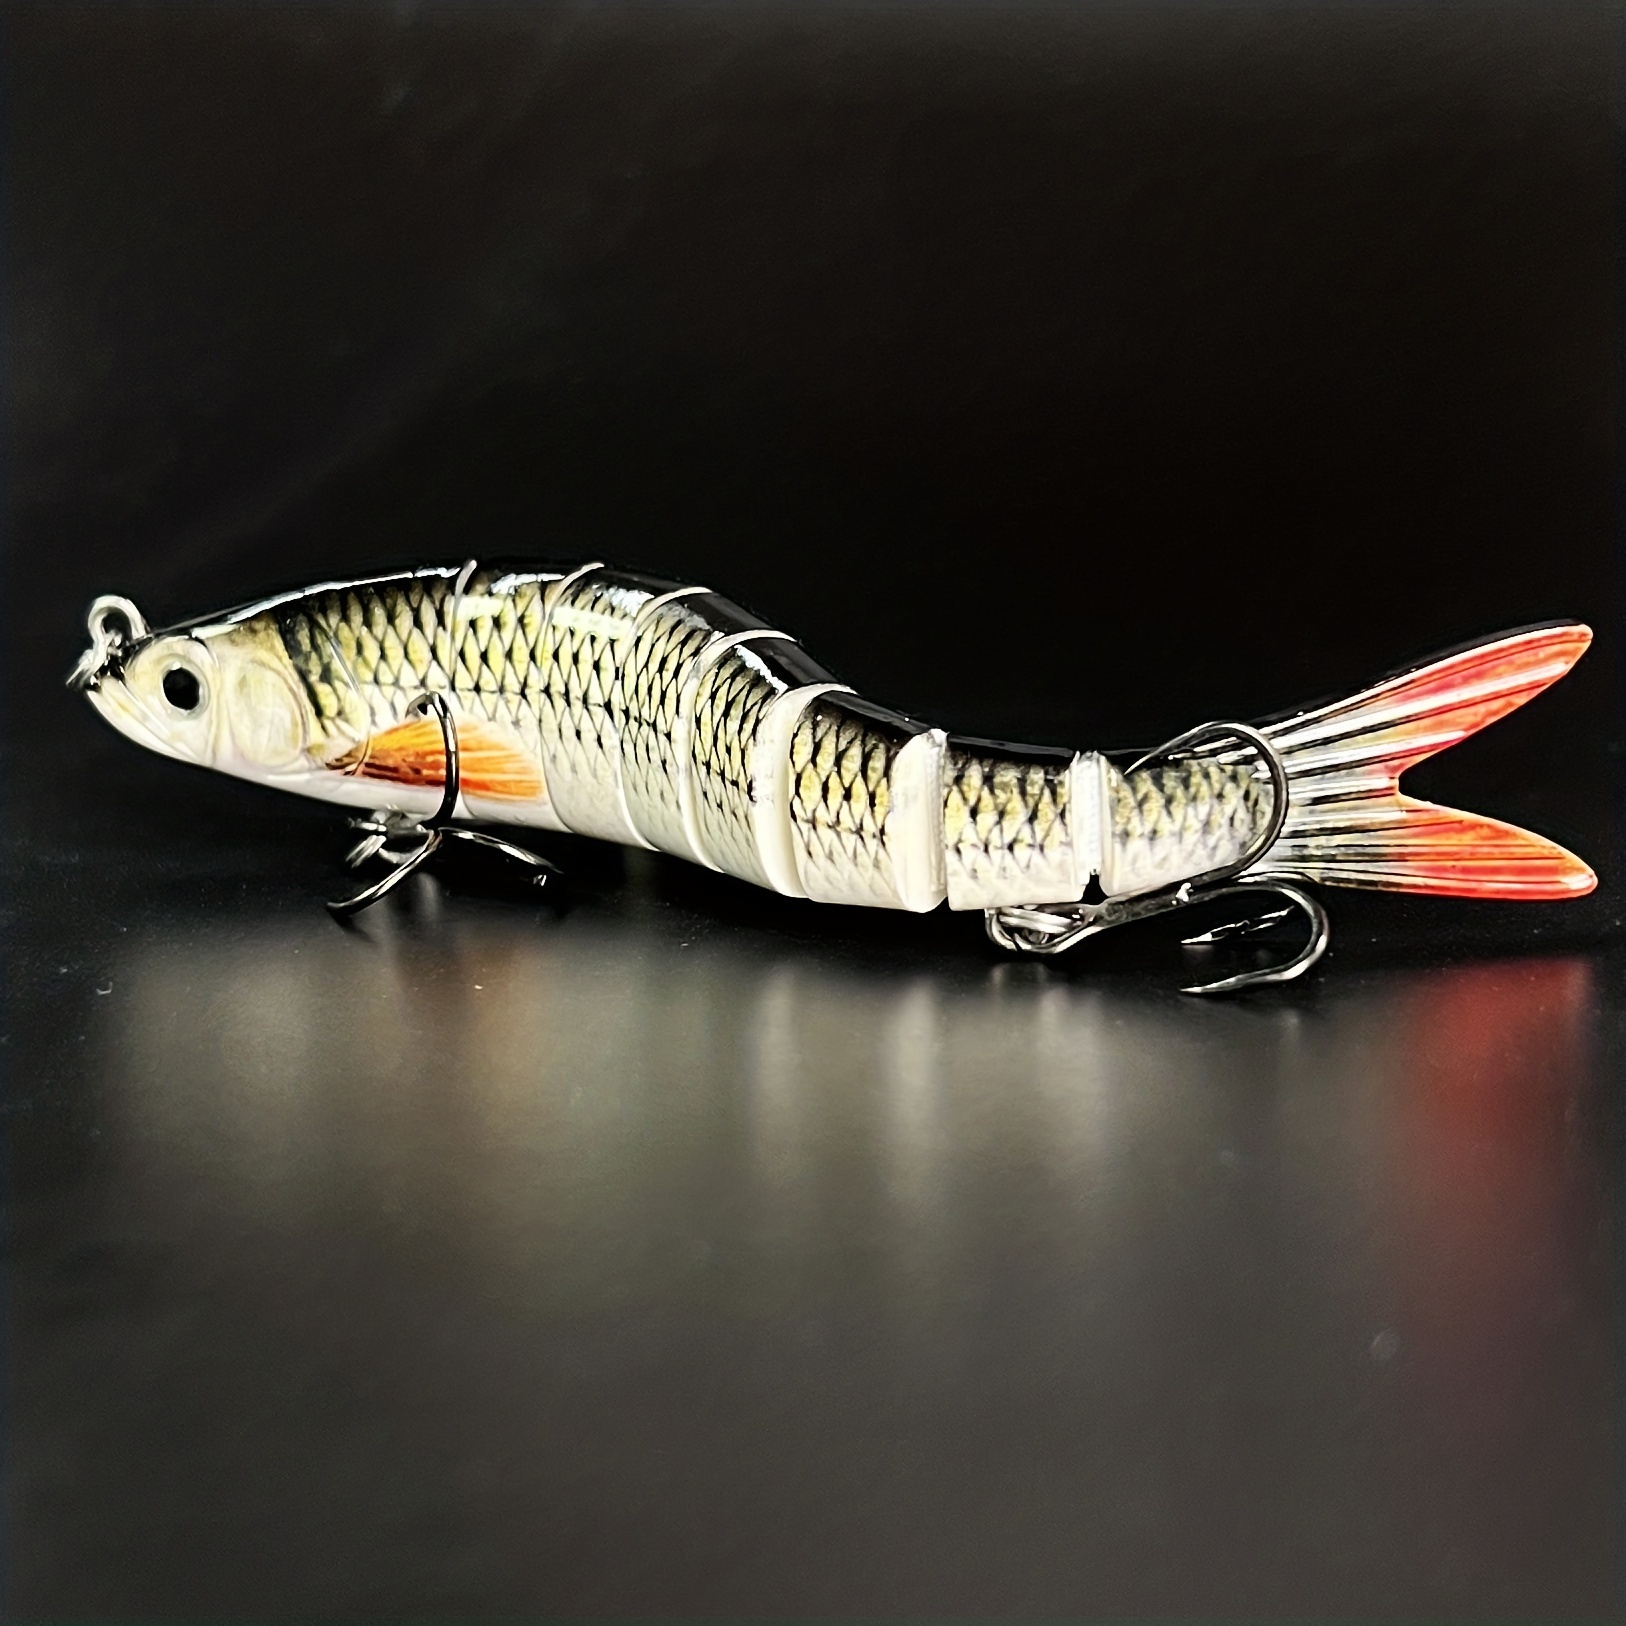 1pc 14cm/26g Multi Sections Artificial Hard Plastic Bait, 5.51in/0.92oz  Bionic Wobbler Sinking Fishing Lure, Fishing Accessories